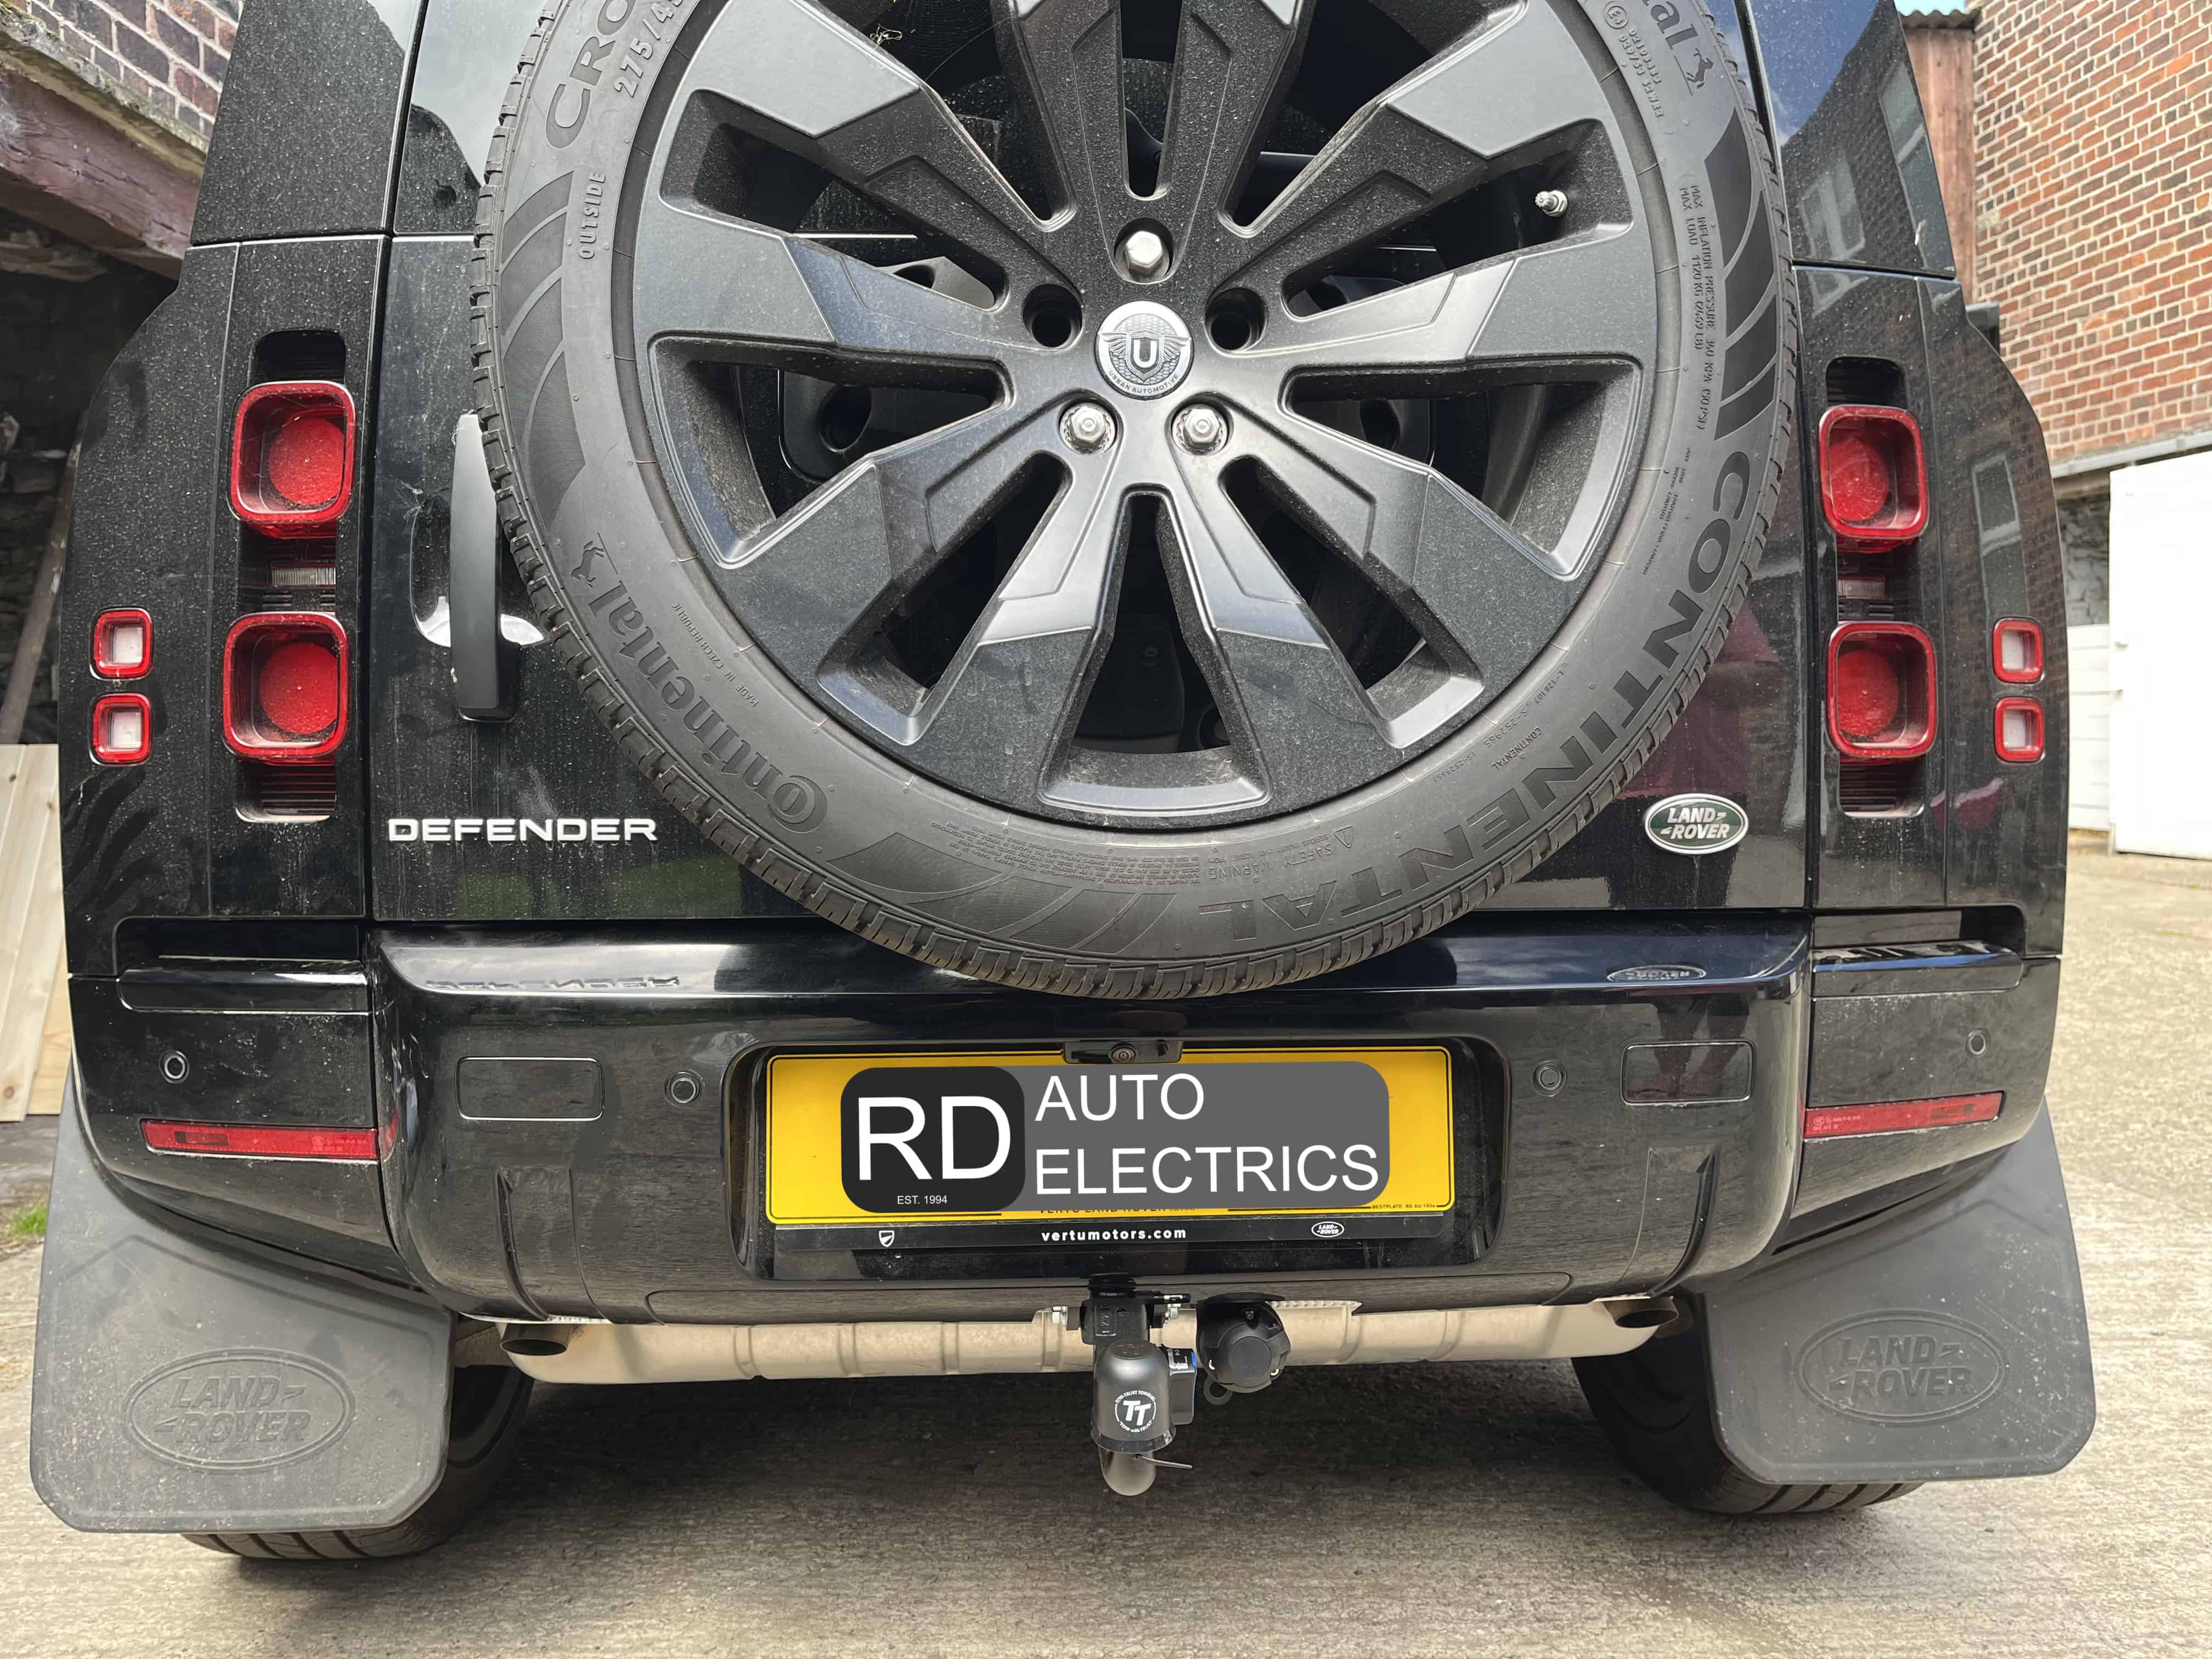 Land Rover Defender with Towbar